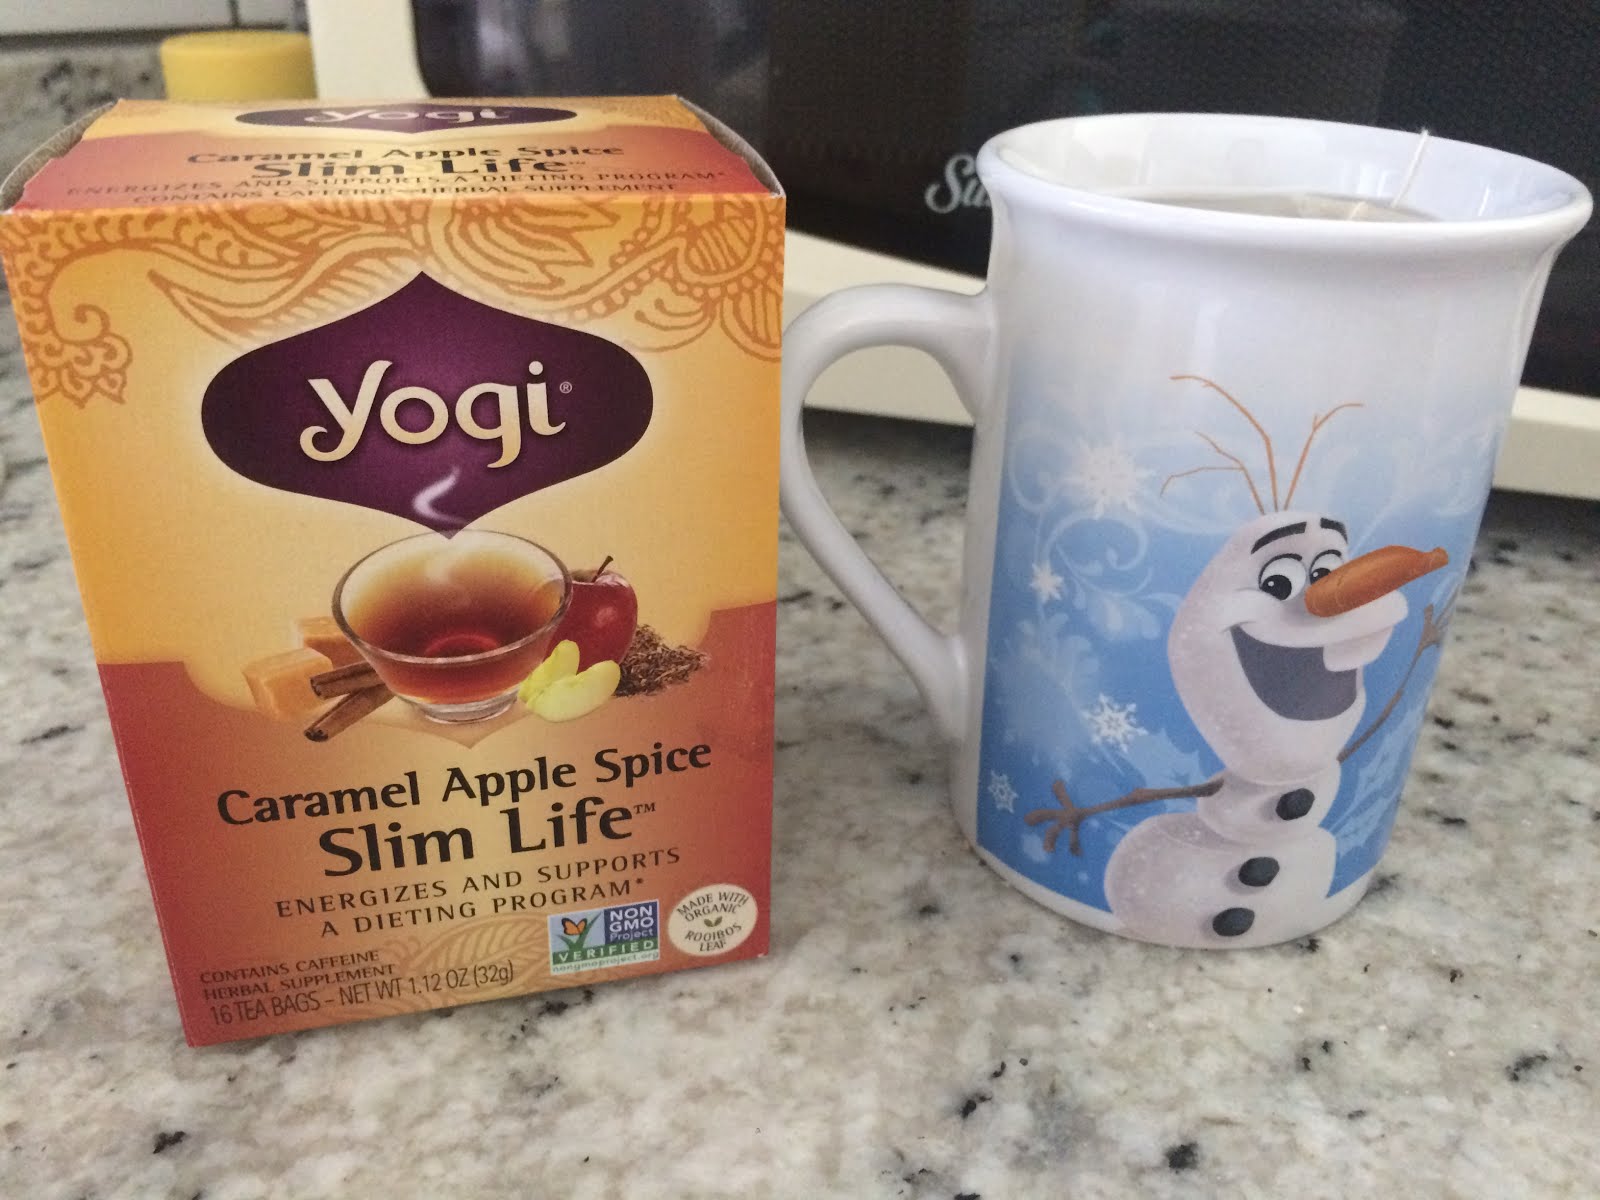 My favorite tea lately! Apples n spice and it's supposedly slimming :)